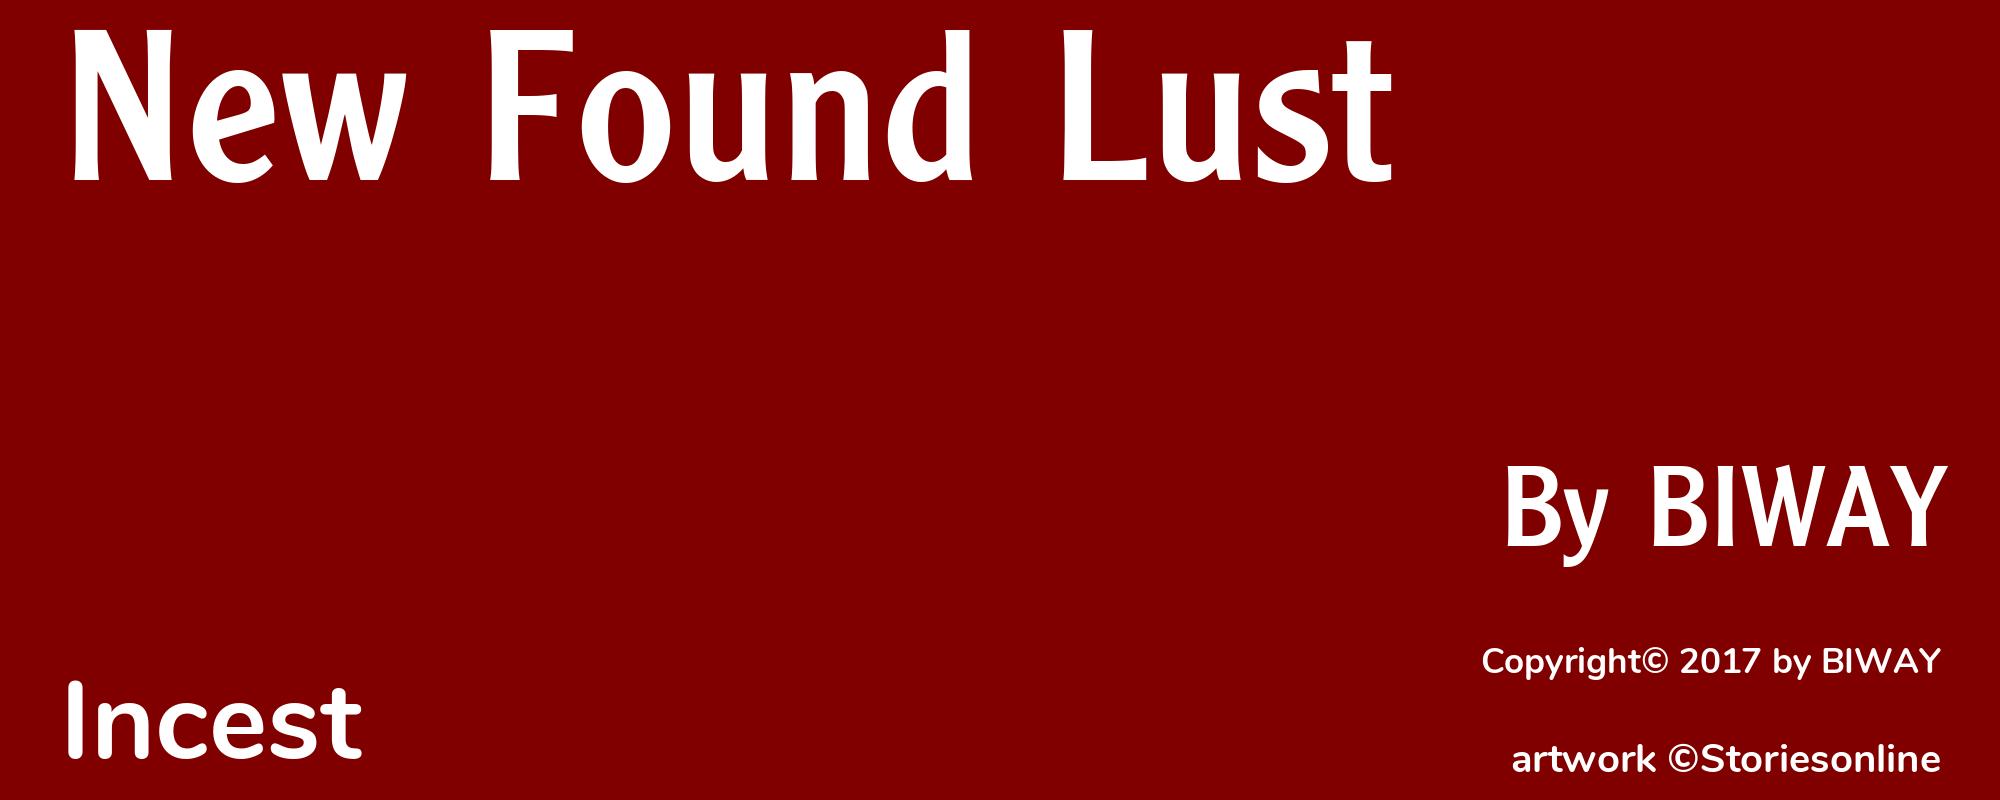 New Found Lust - Cover